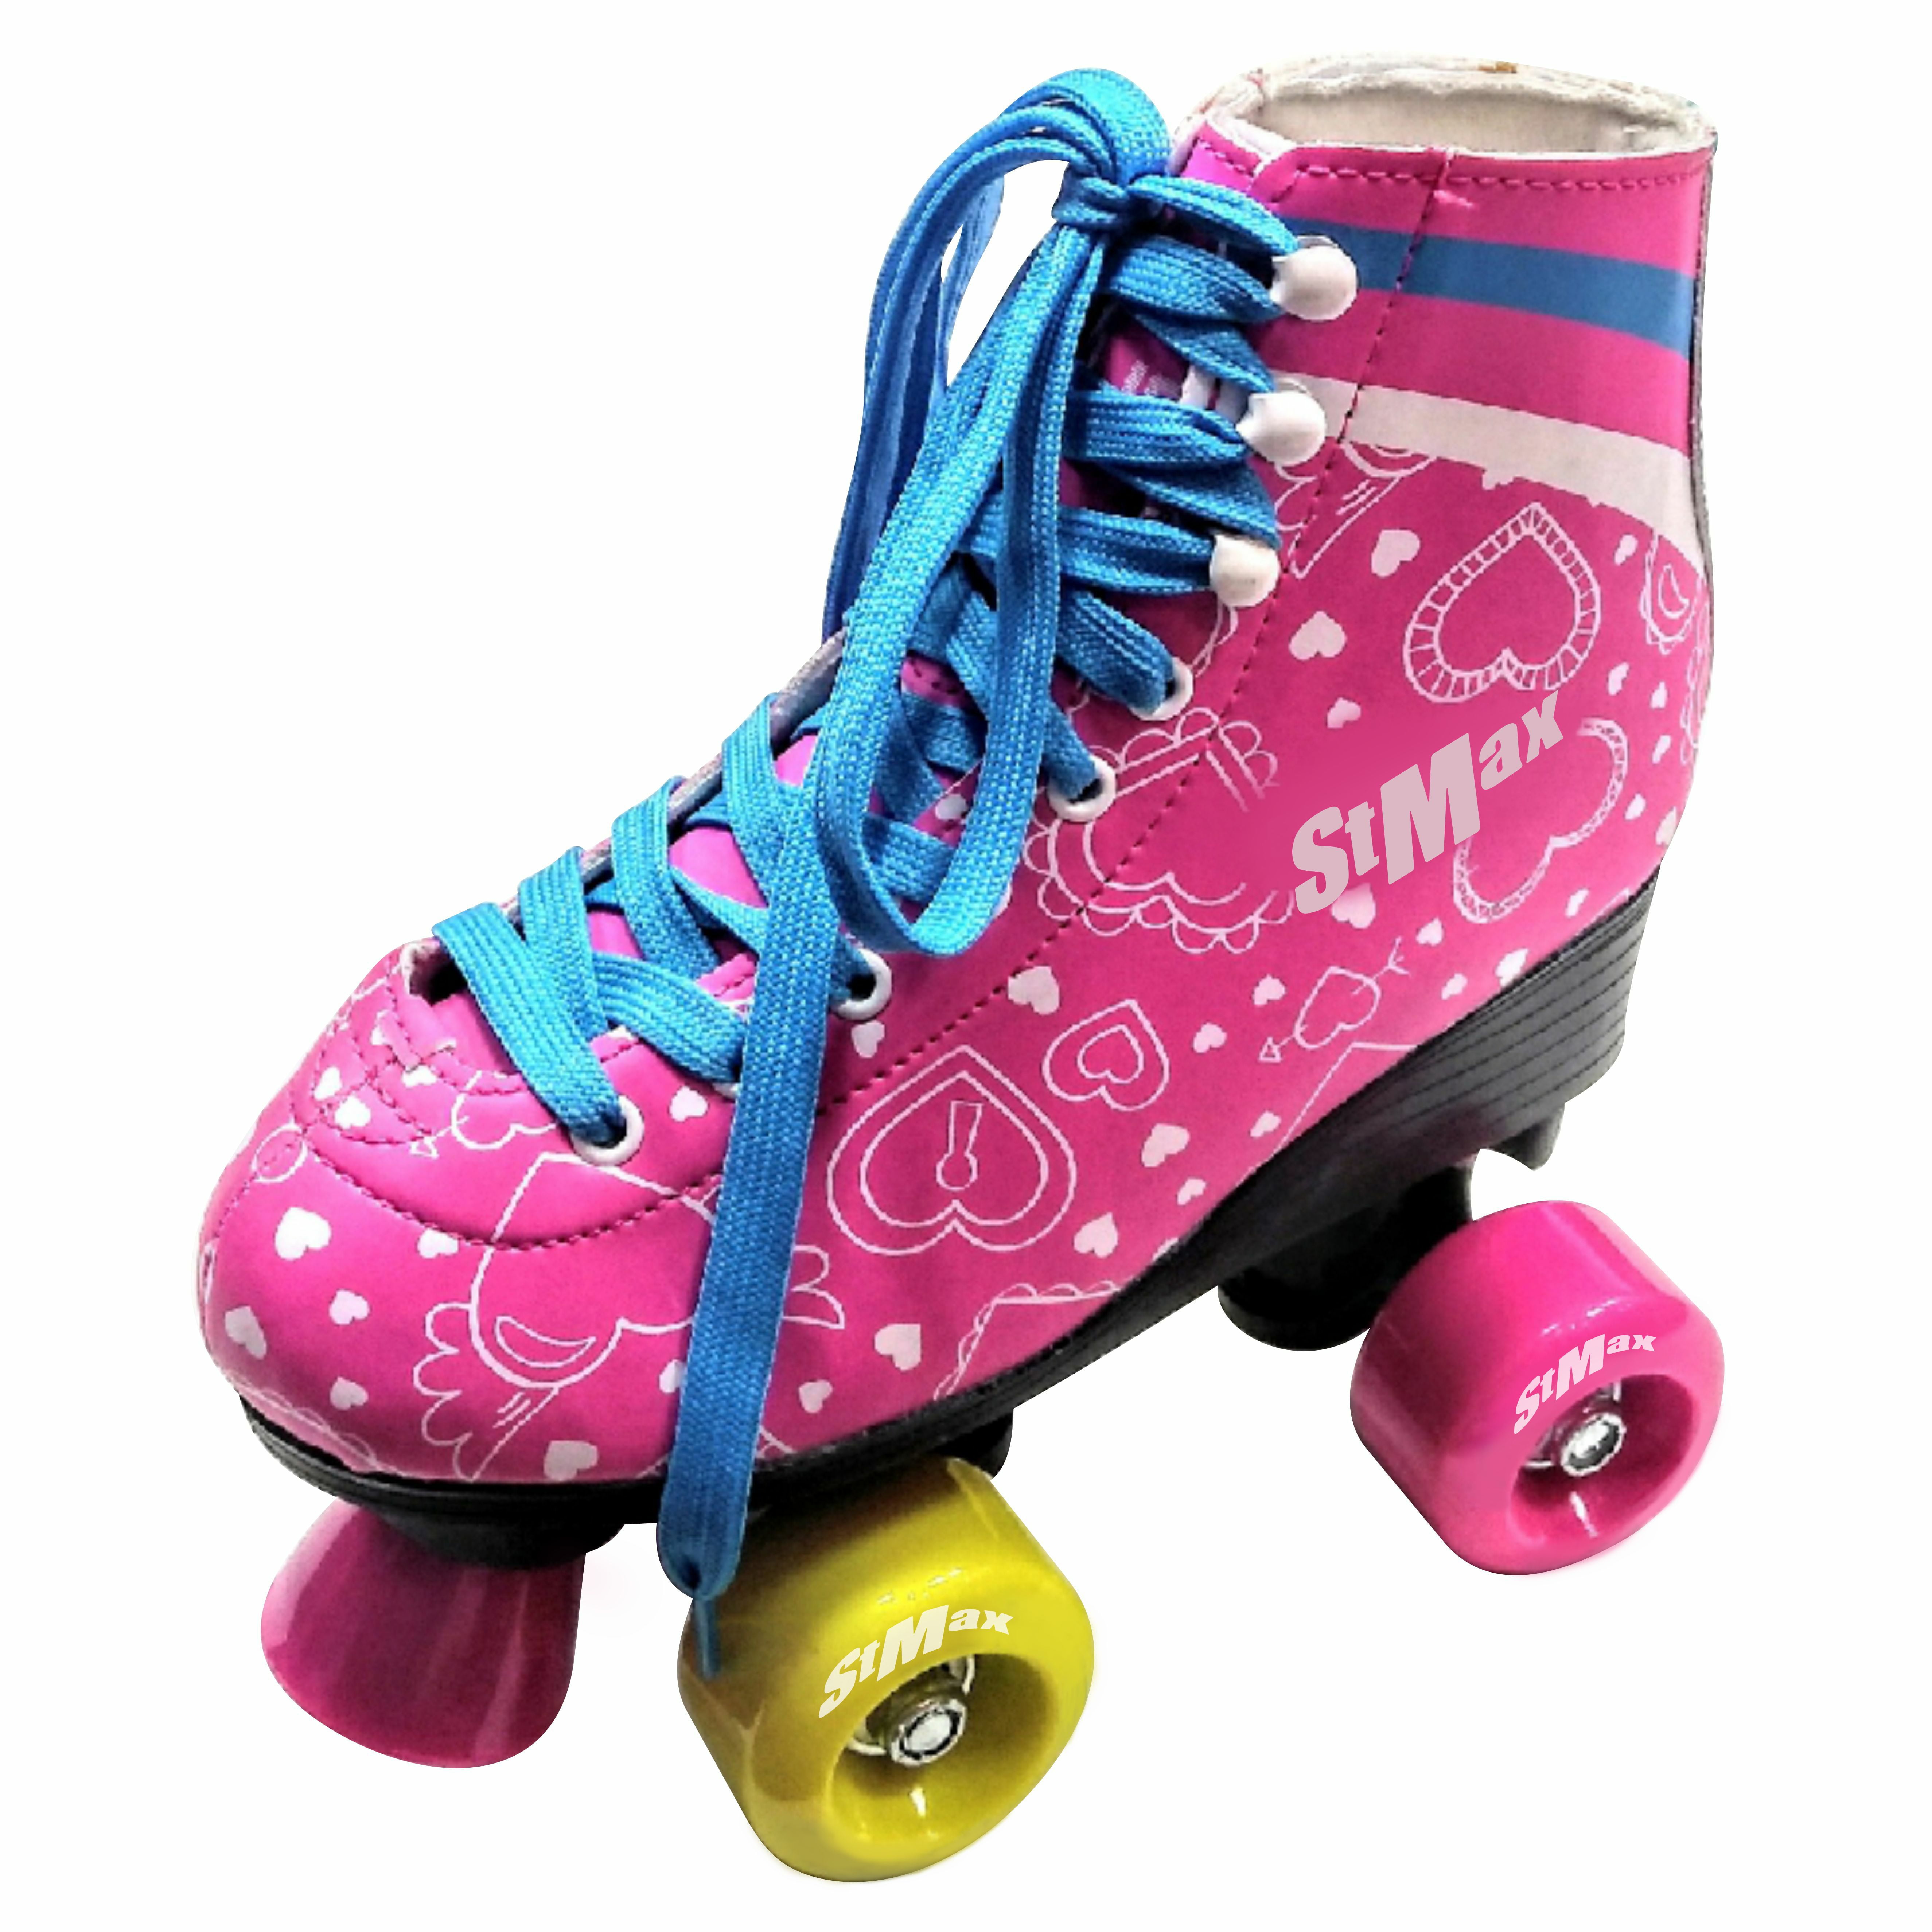 Quad Roller Skates for Girls and Women Size 5.5 Youth/ 7.5 Women Pink Flower Out 